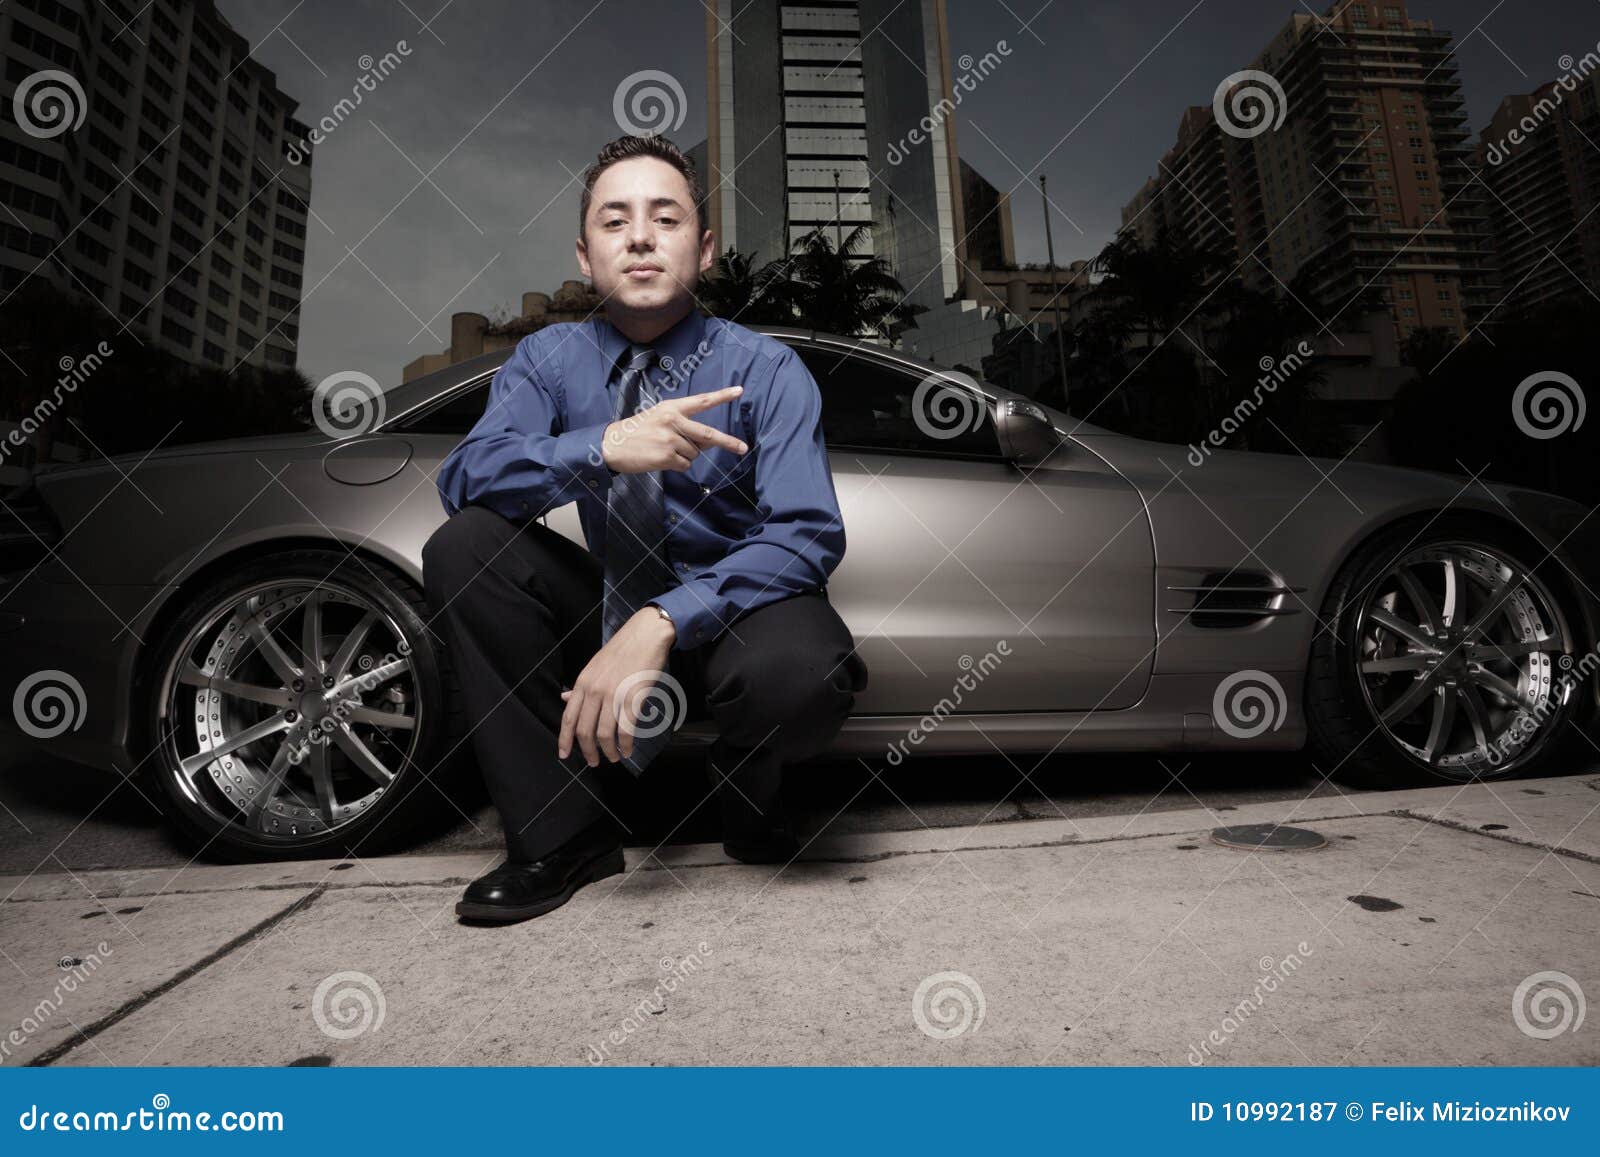 A Man Wearing Beside the Car · Free Stock Photo